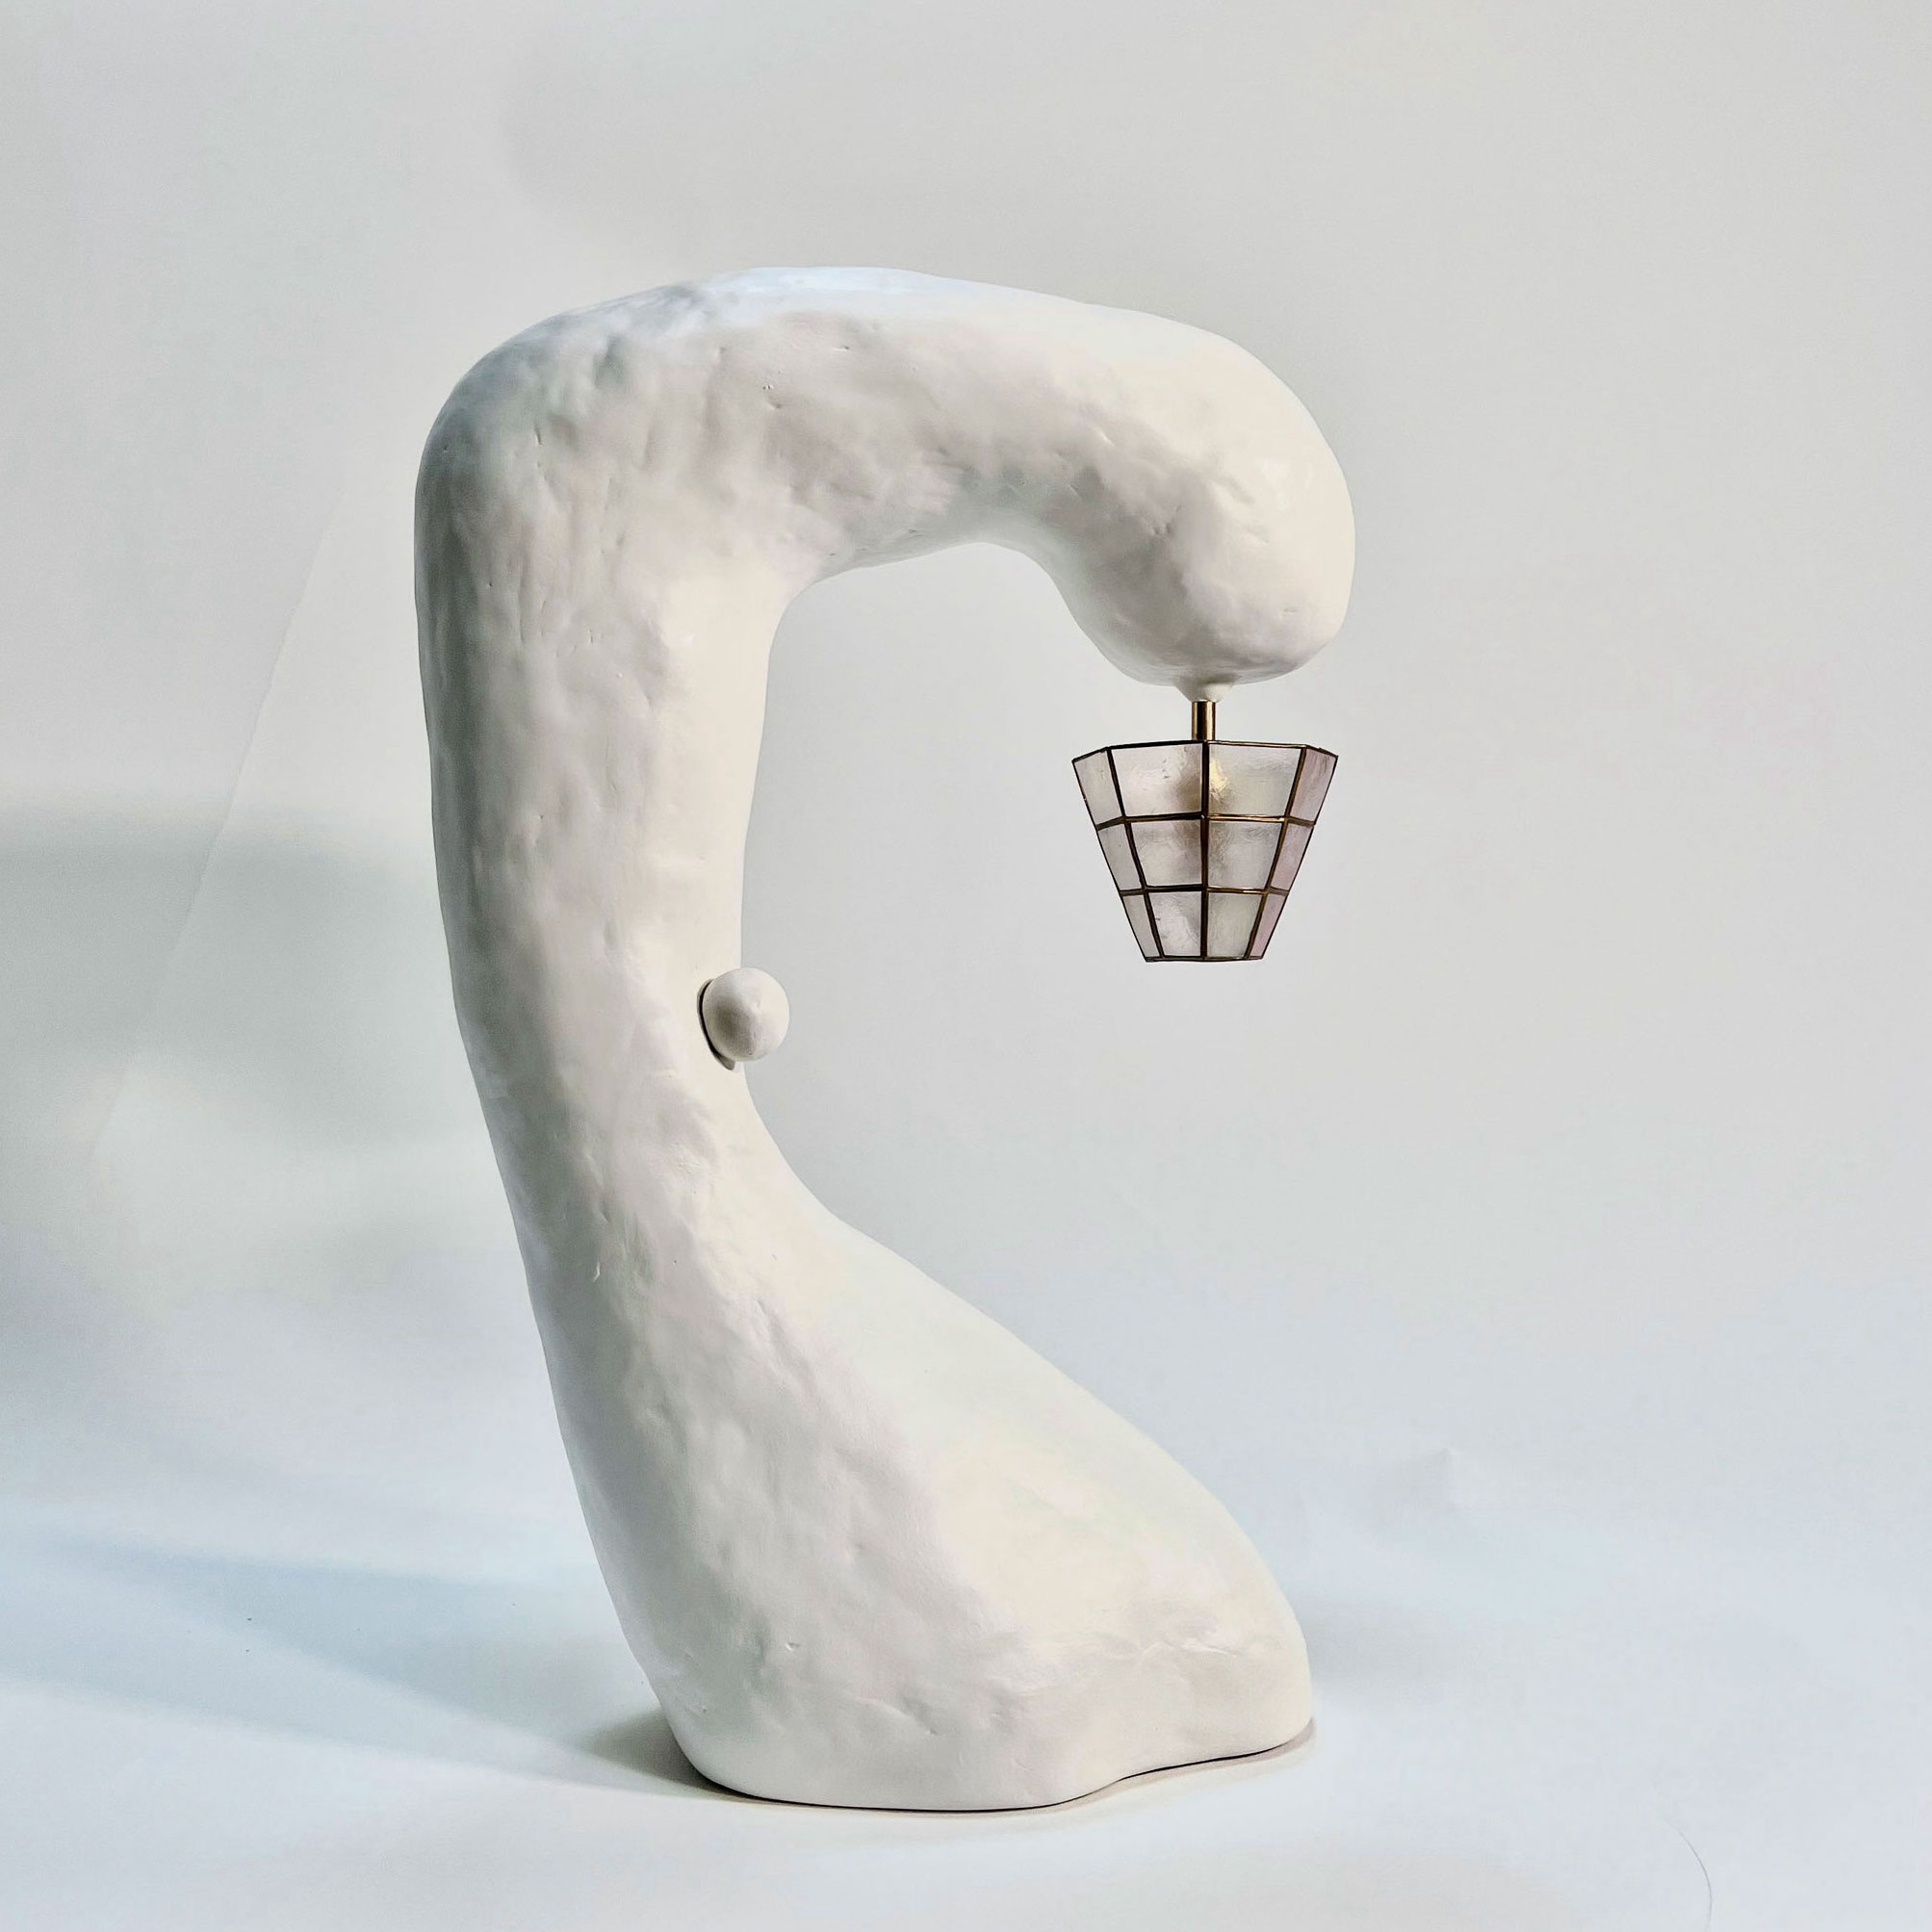 Le-Cygne-Table-Lamp_Brent-Warr_01